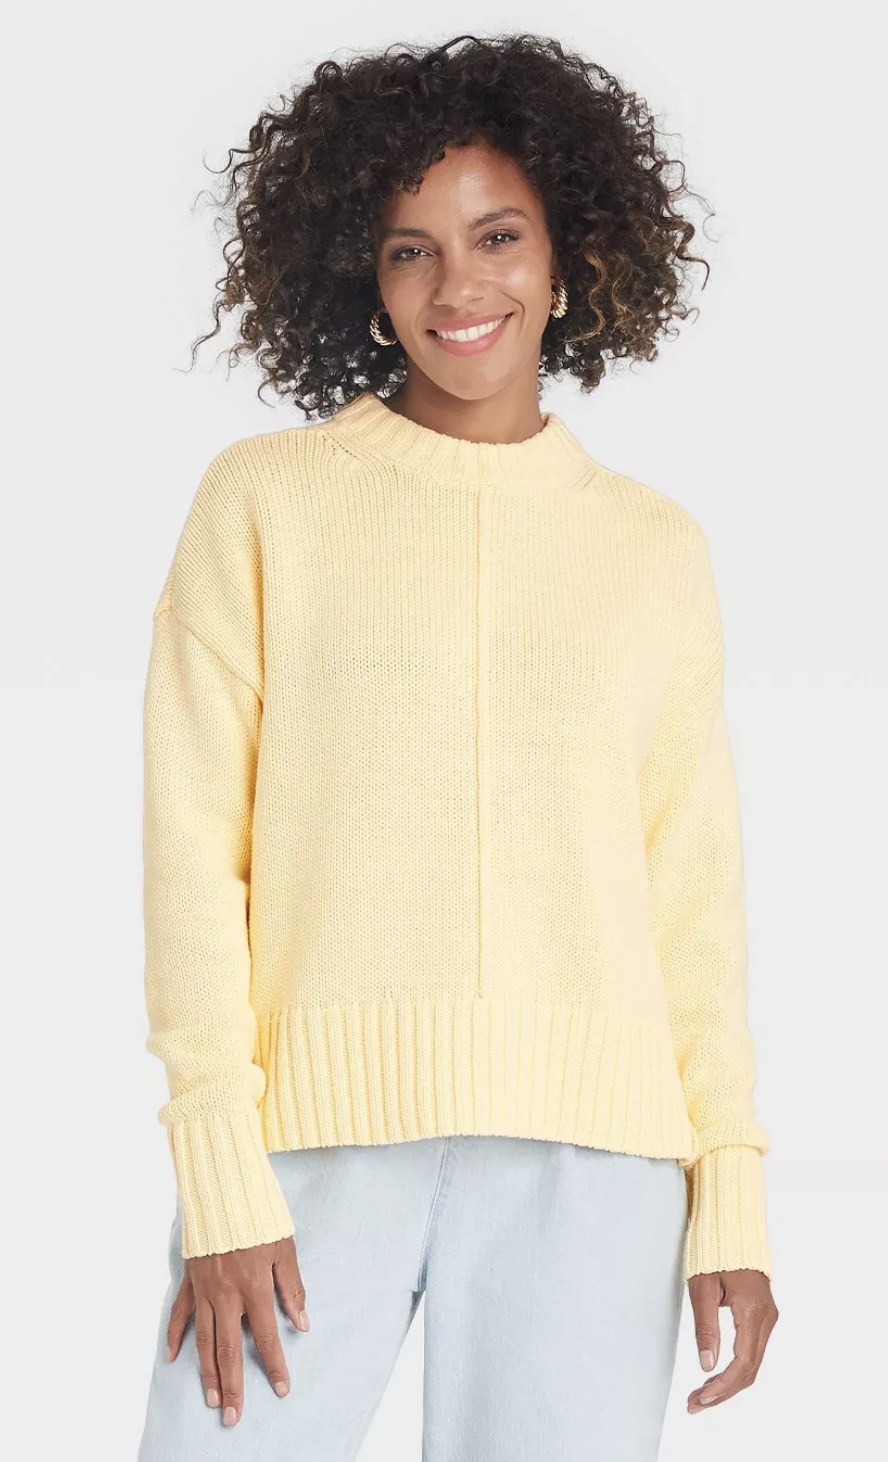 model wearing the sweater in pale yellow